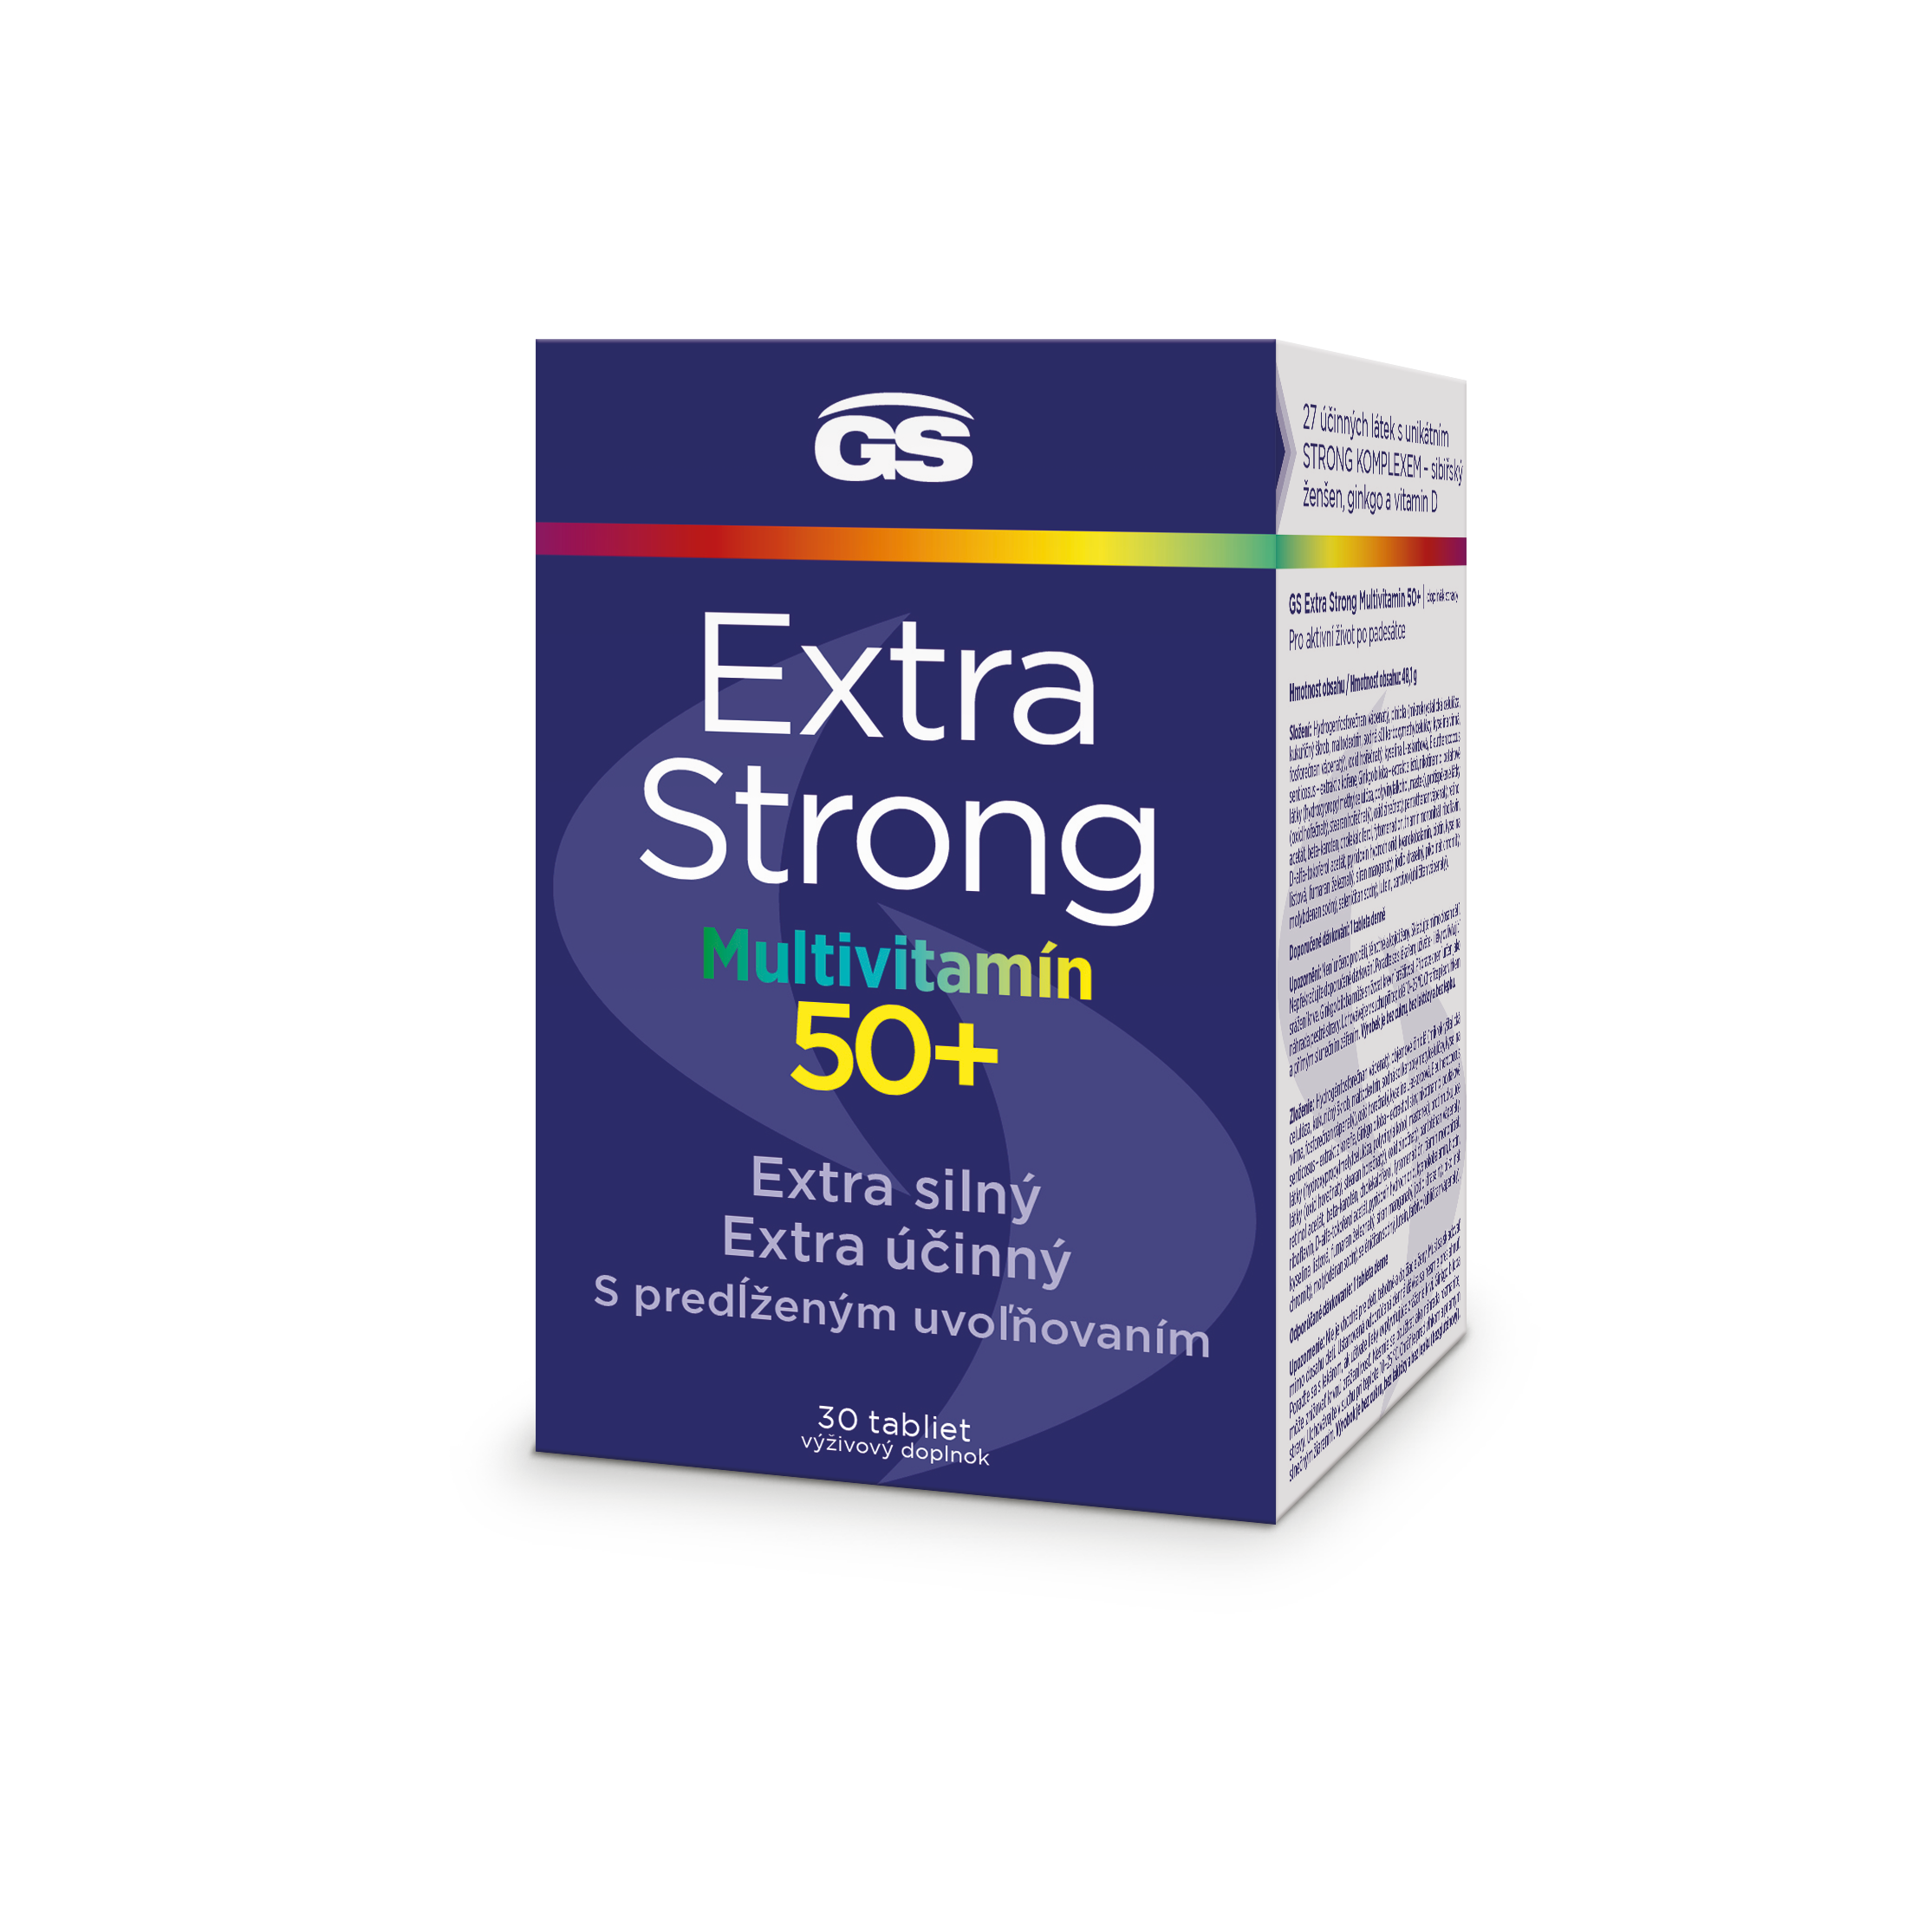 GS Extra Strong Multivitamin, 50 30 tbl